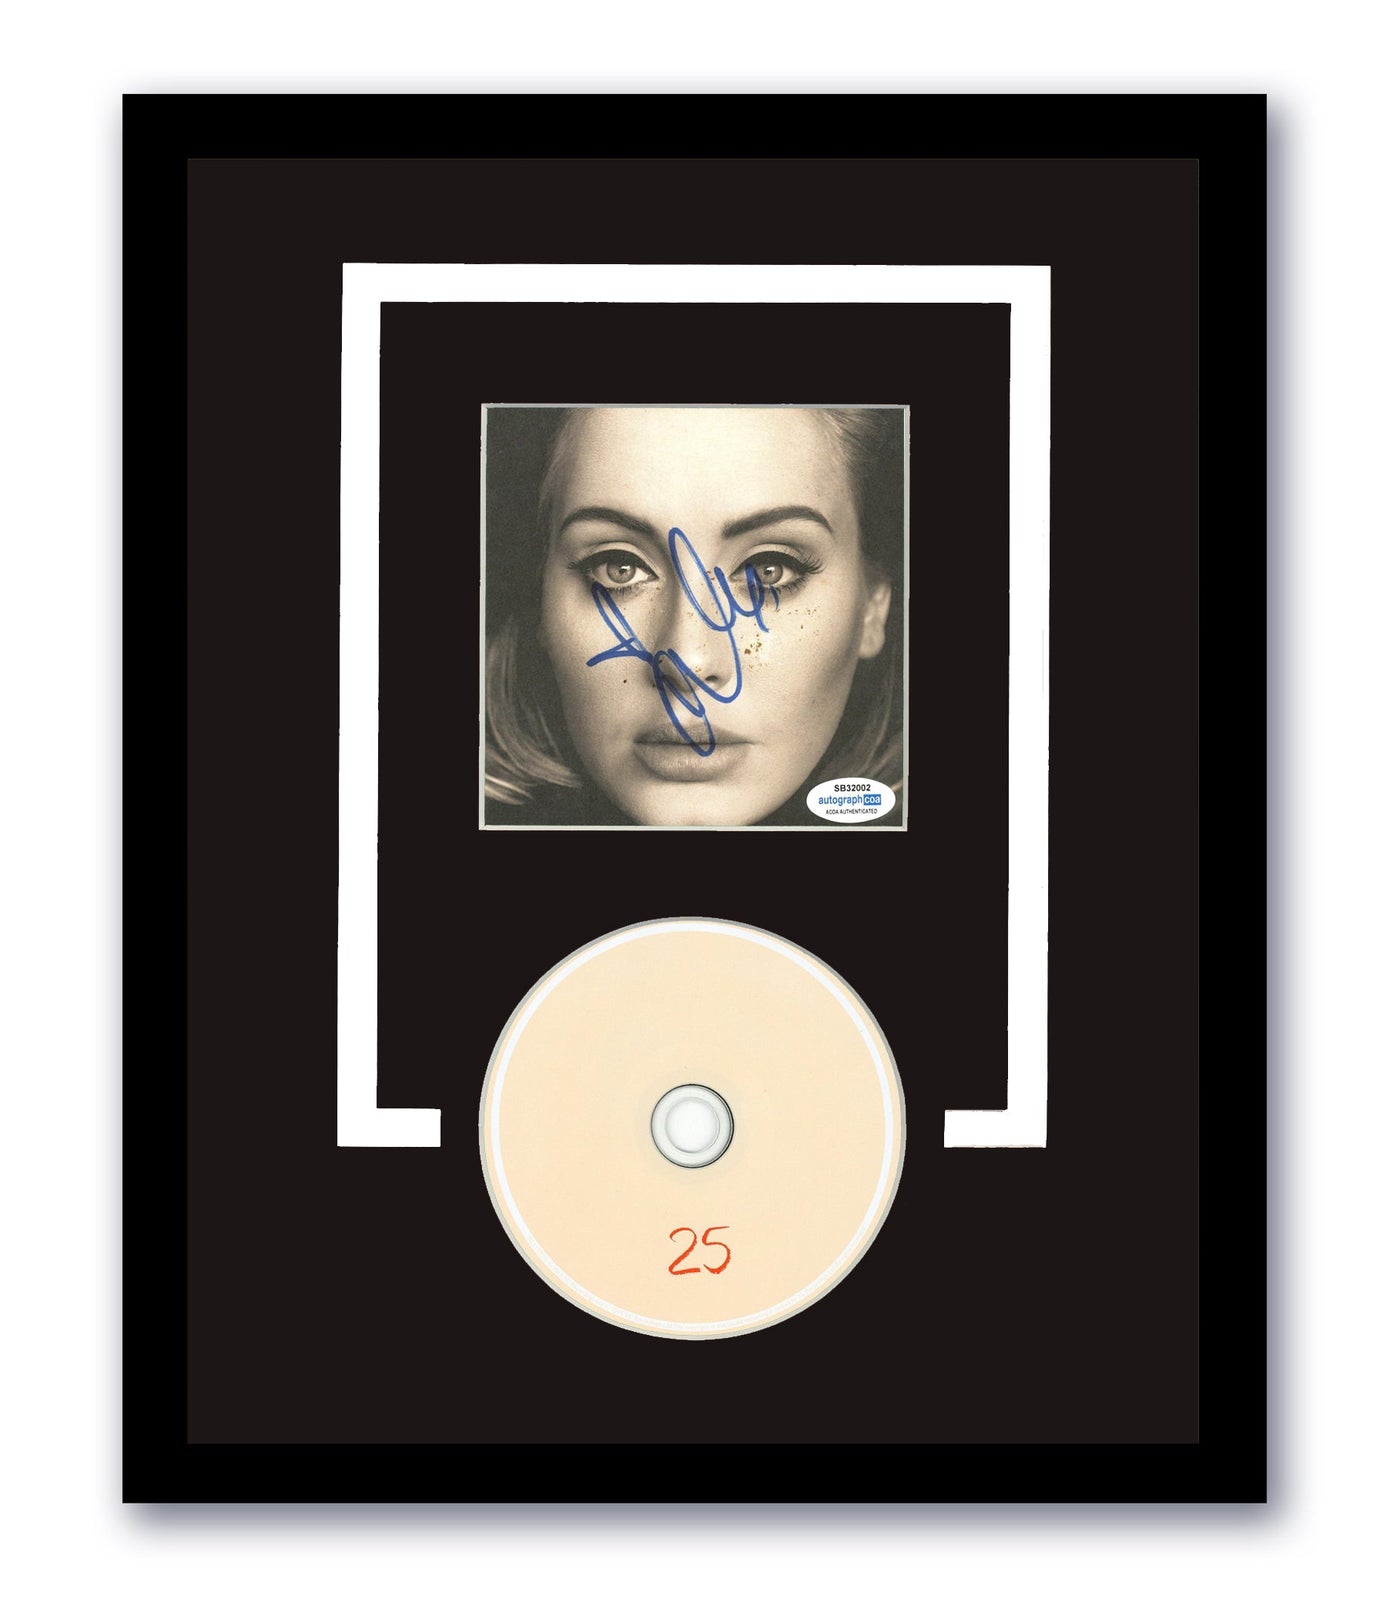 Adele SIGNED 25 CD 11X14 Framed Authentic Autographed ACOA